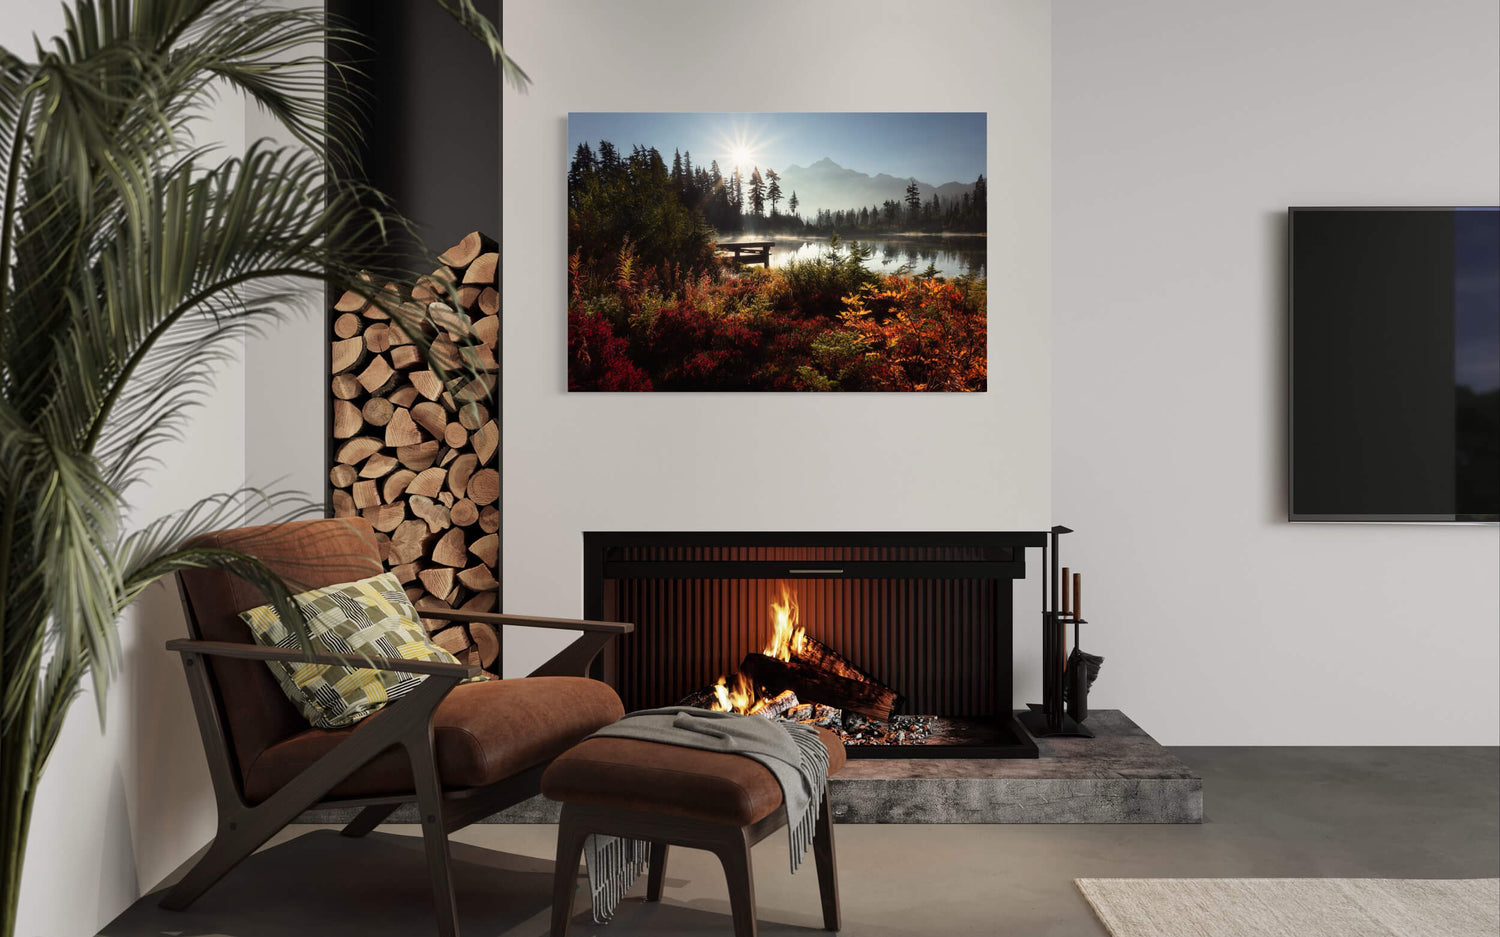 A Picture Lake photograph created near Mount Baker hangs in a living room.